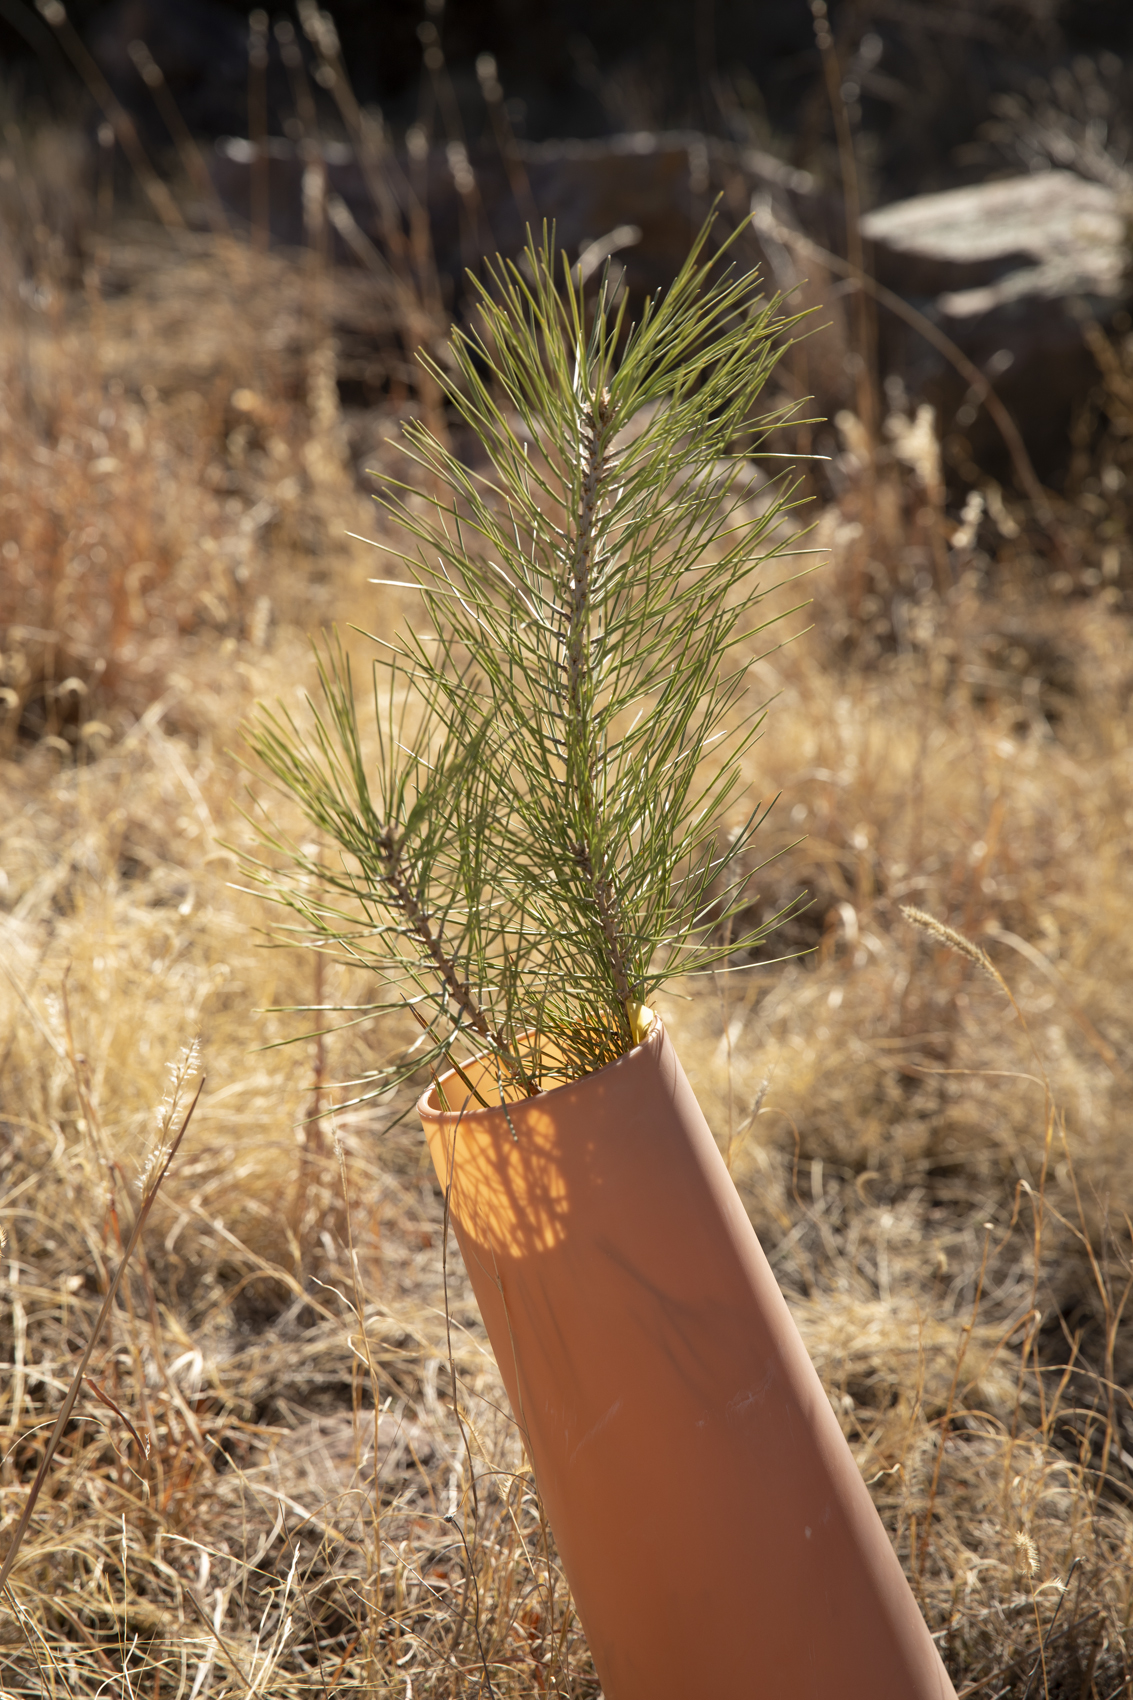 A closeup of a pine seedling in a protective tube.